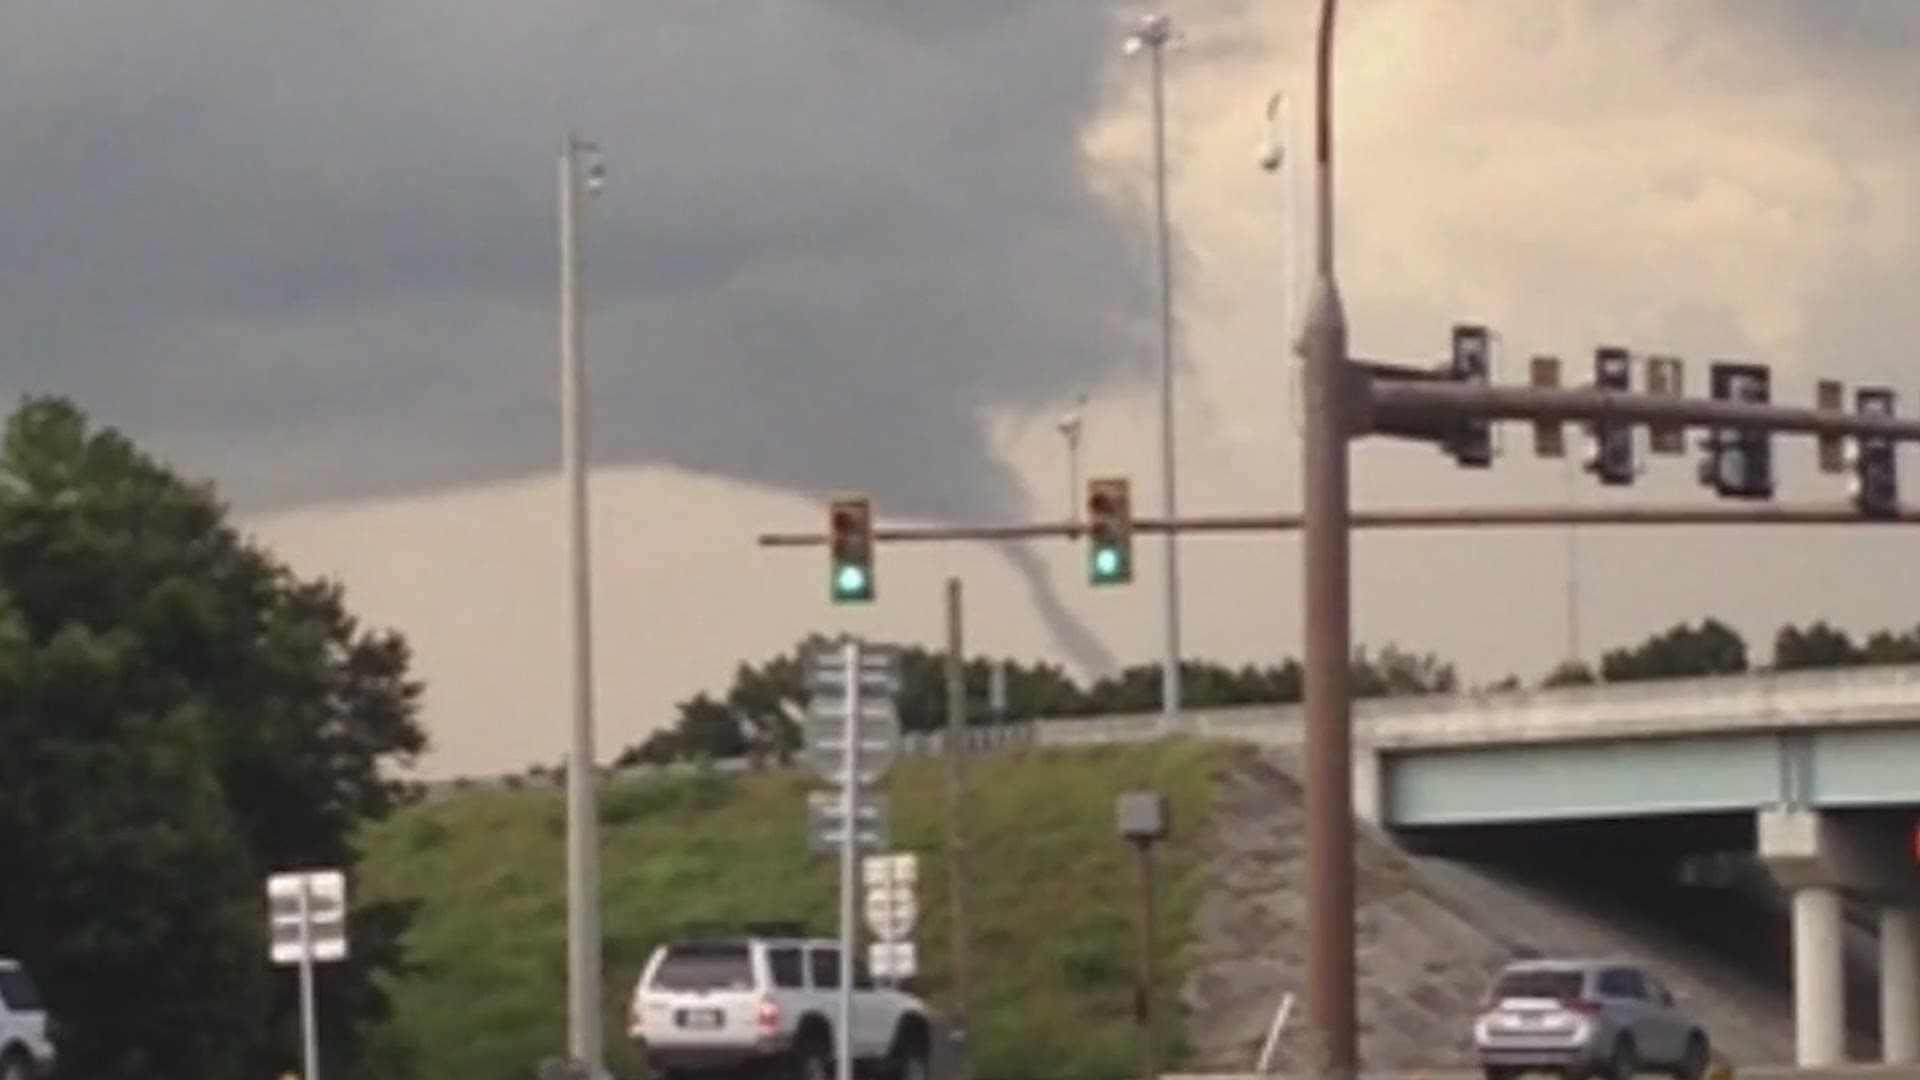 The NWS estimates the funnel touched down south of US Highway 72 and just east of Interstate 75.